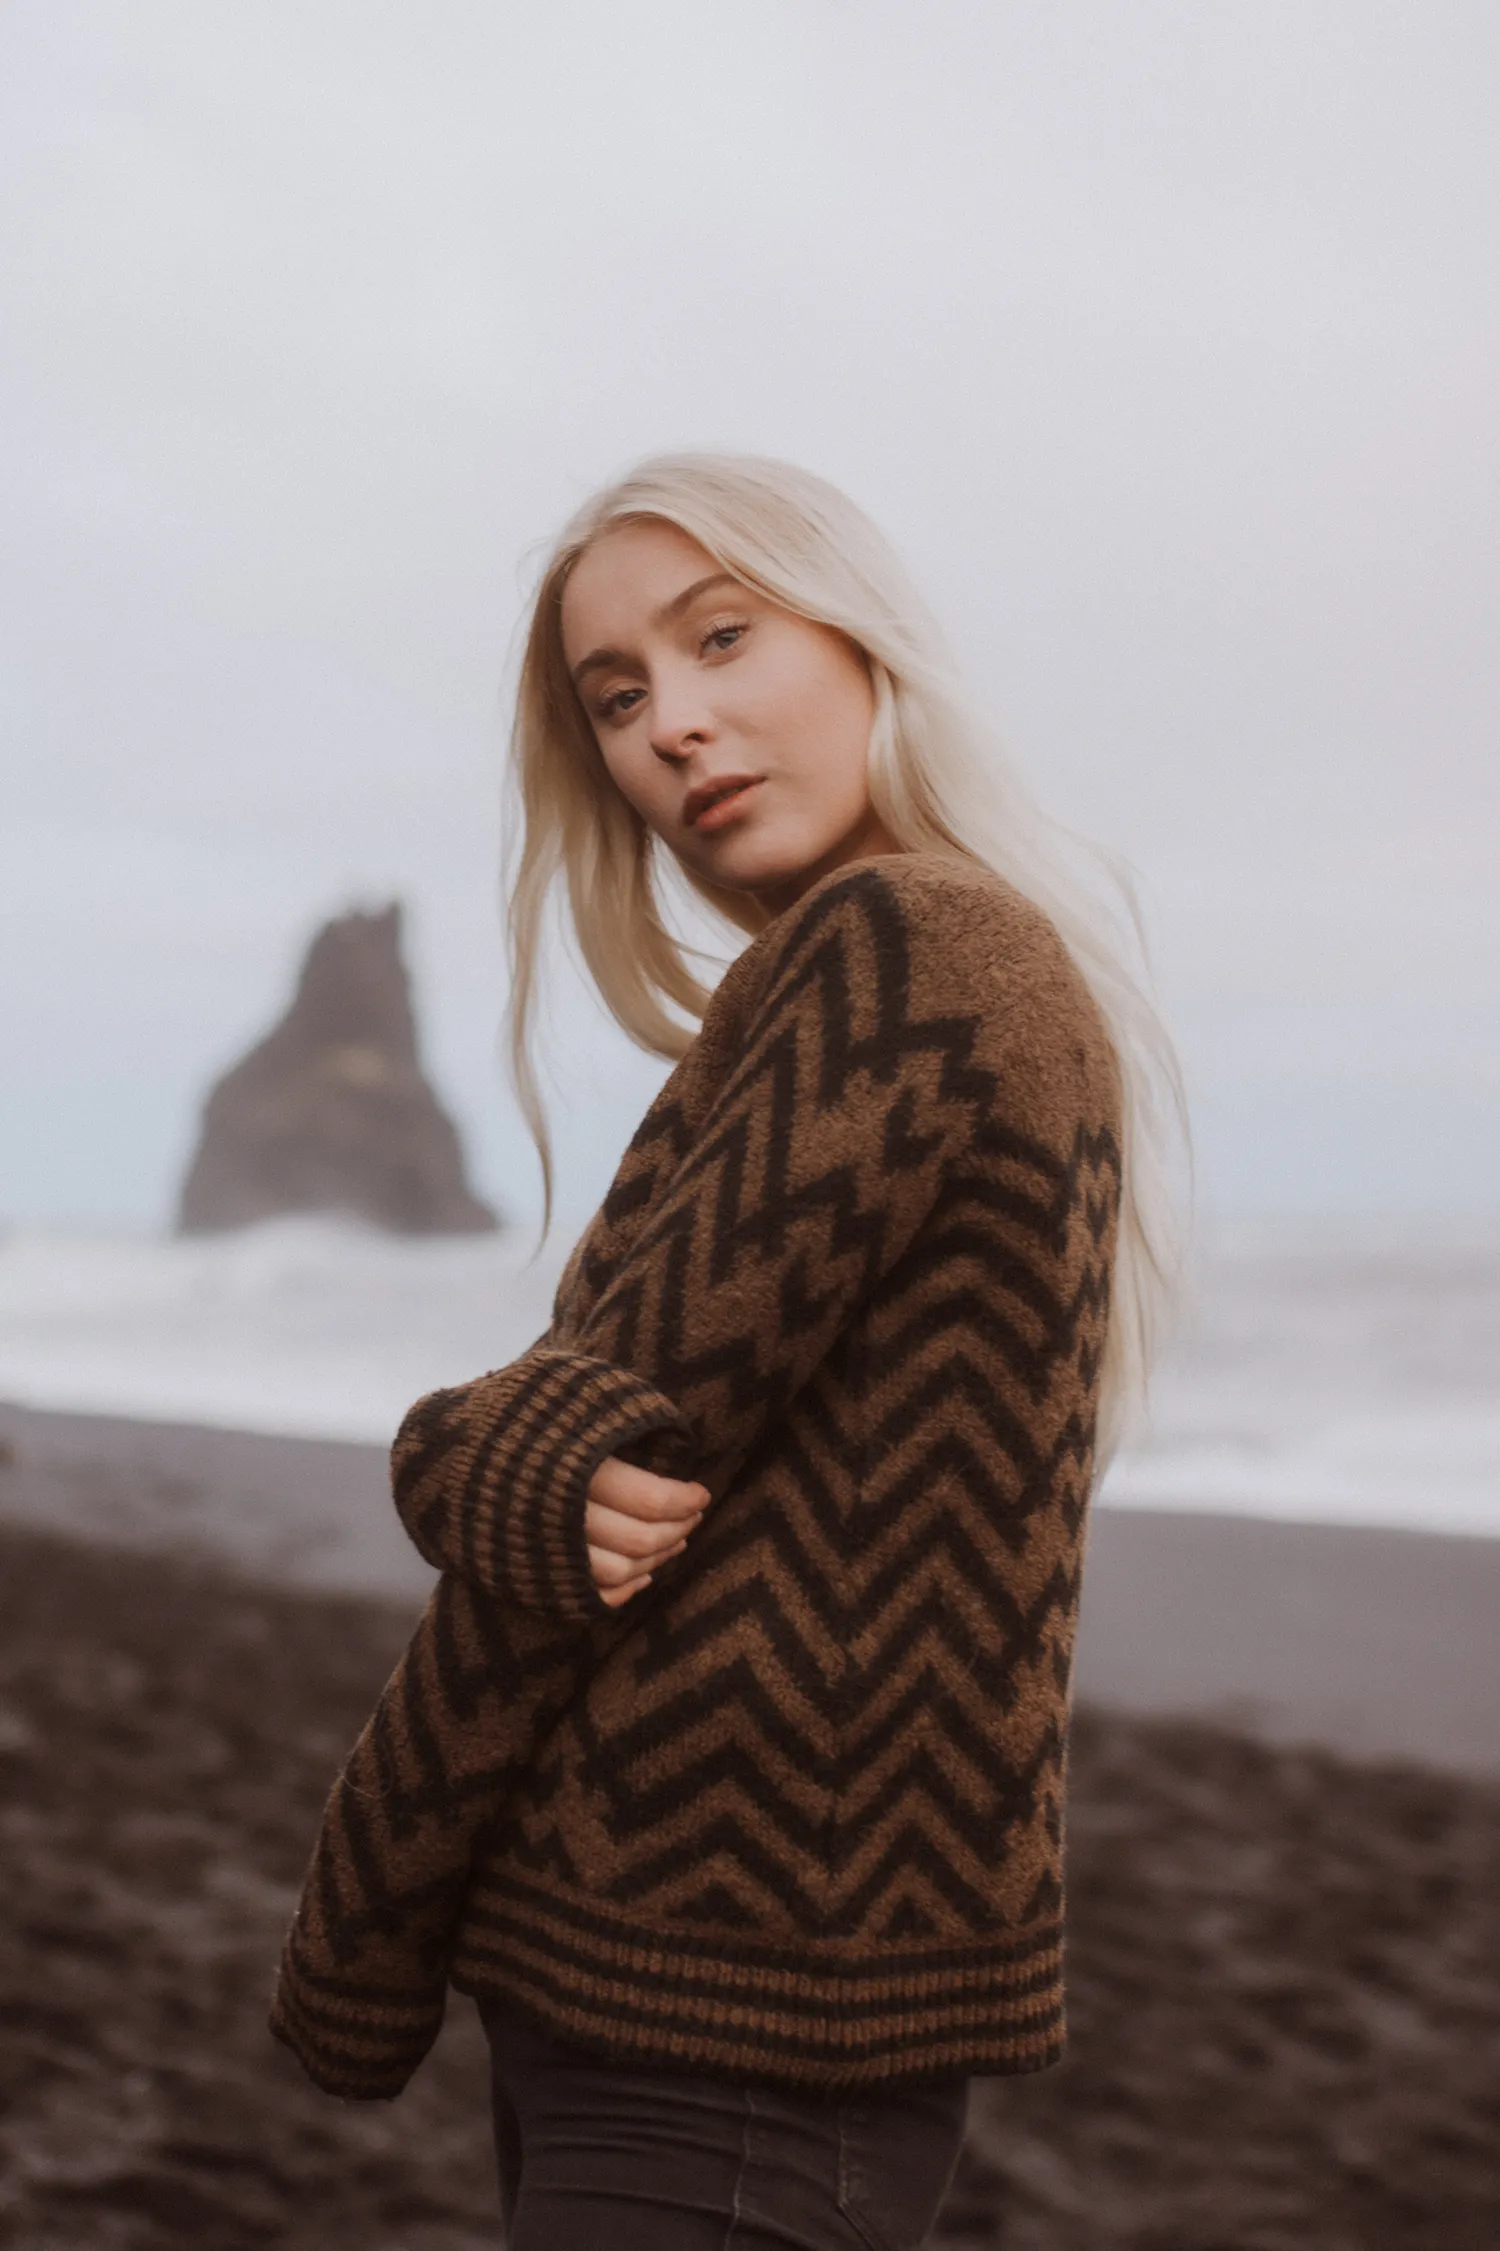 A woman with platinum blonde hair wearing a chevron-patterned sweater at a black sand beach, gazing over her shoulder with a serene expression, with a rugged sea stack blurred in the background.